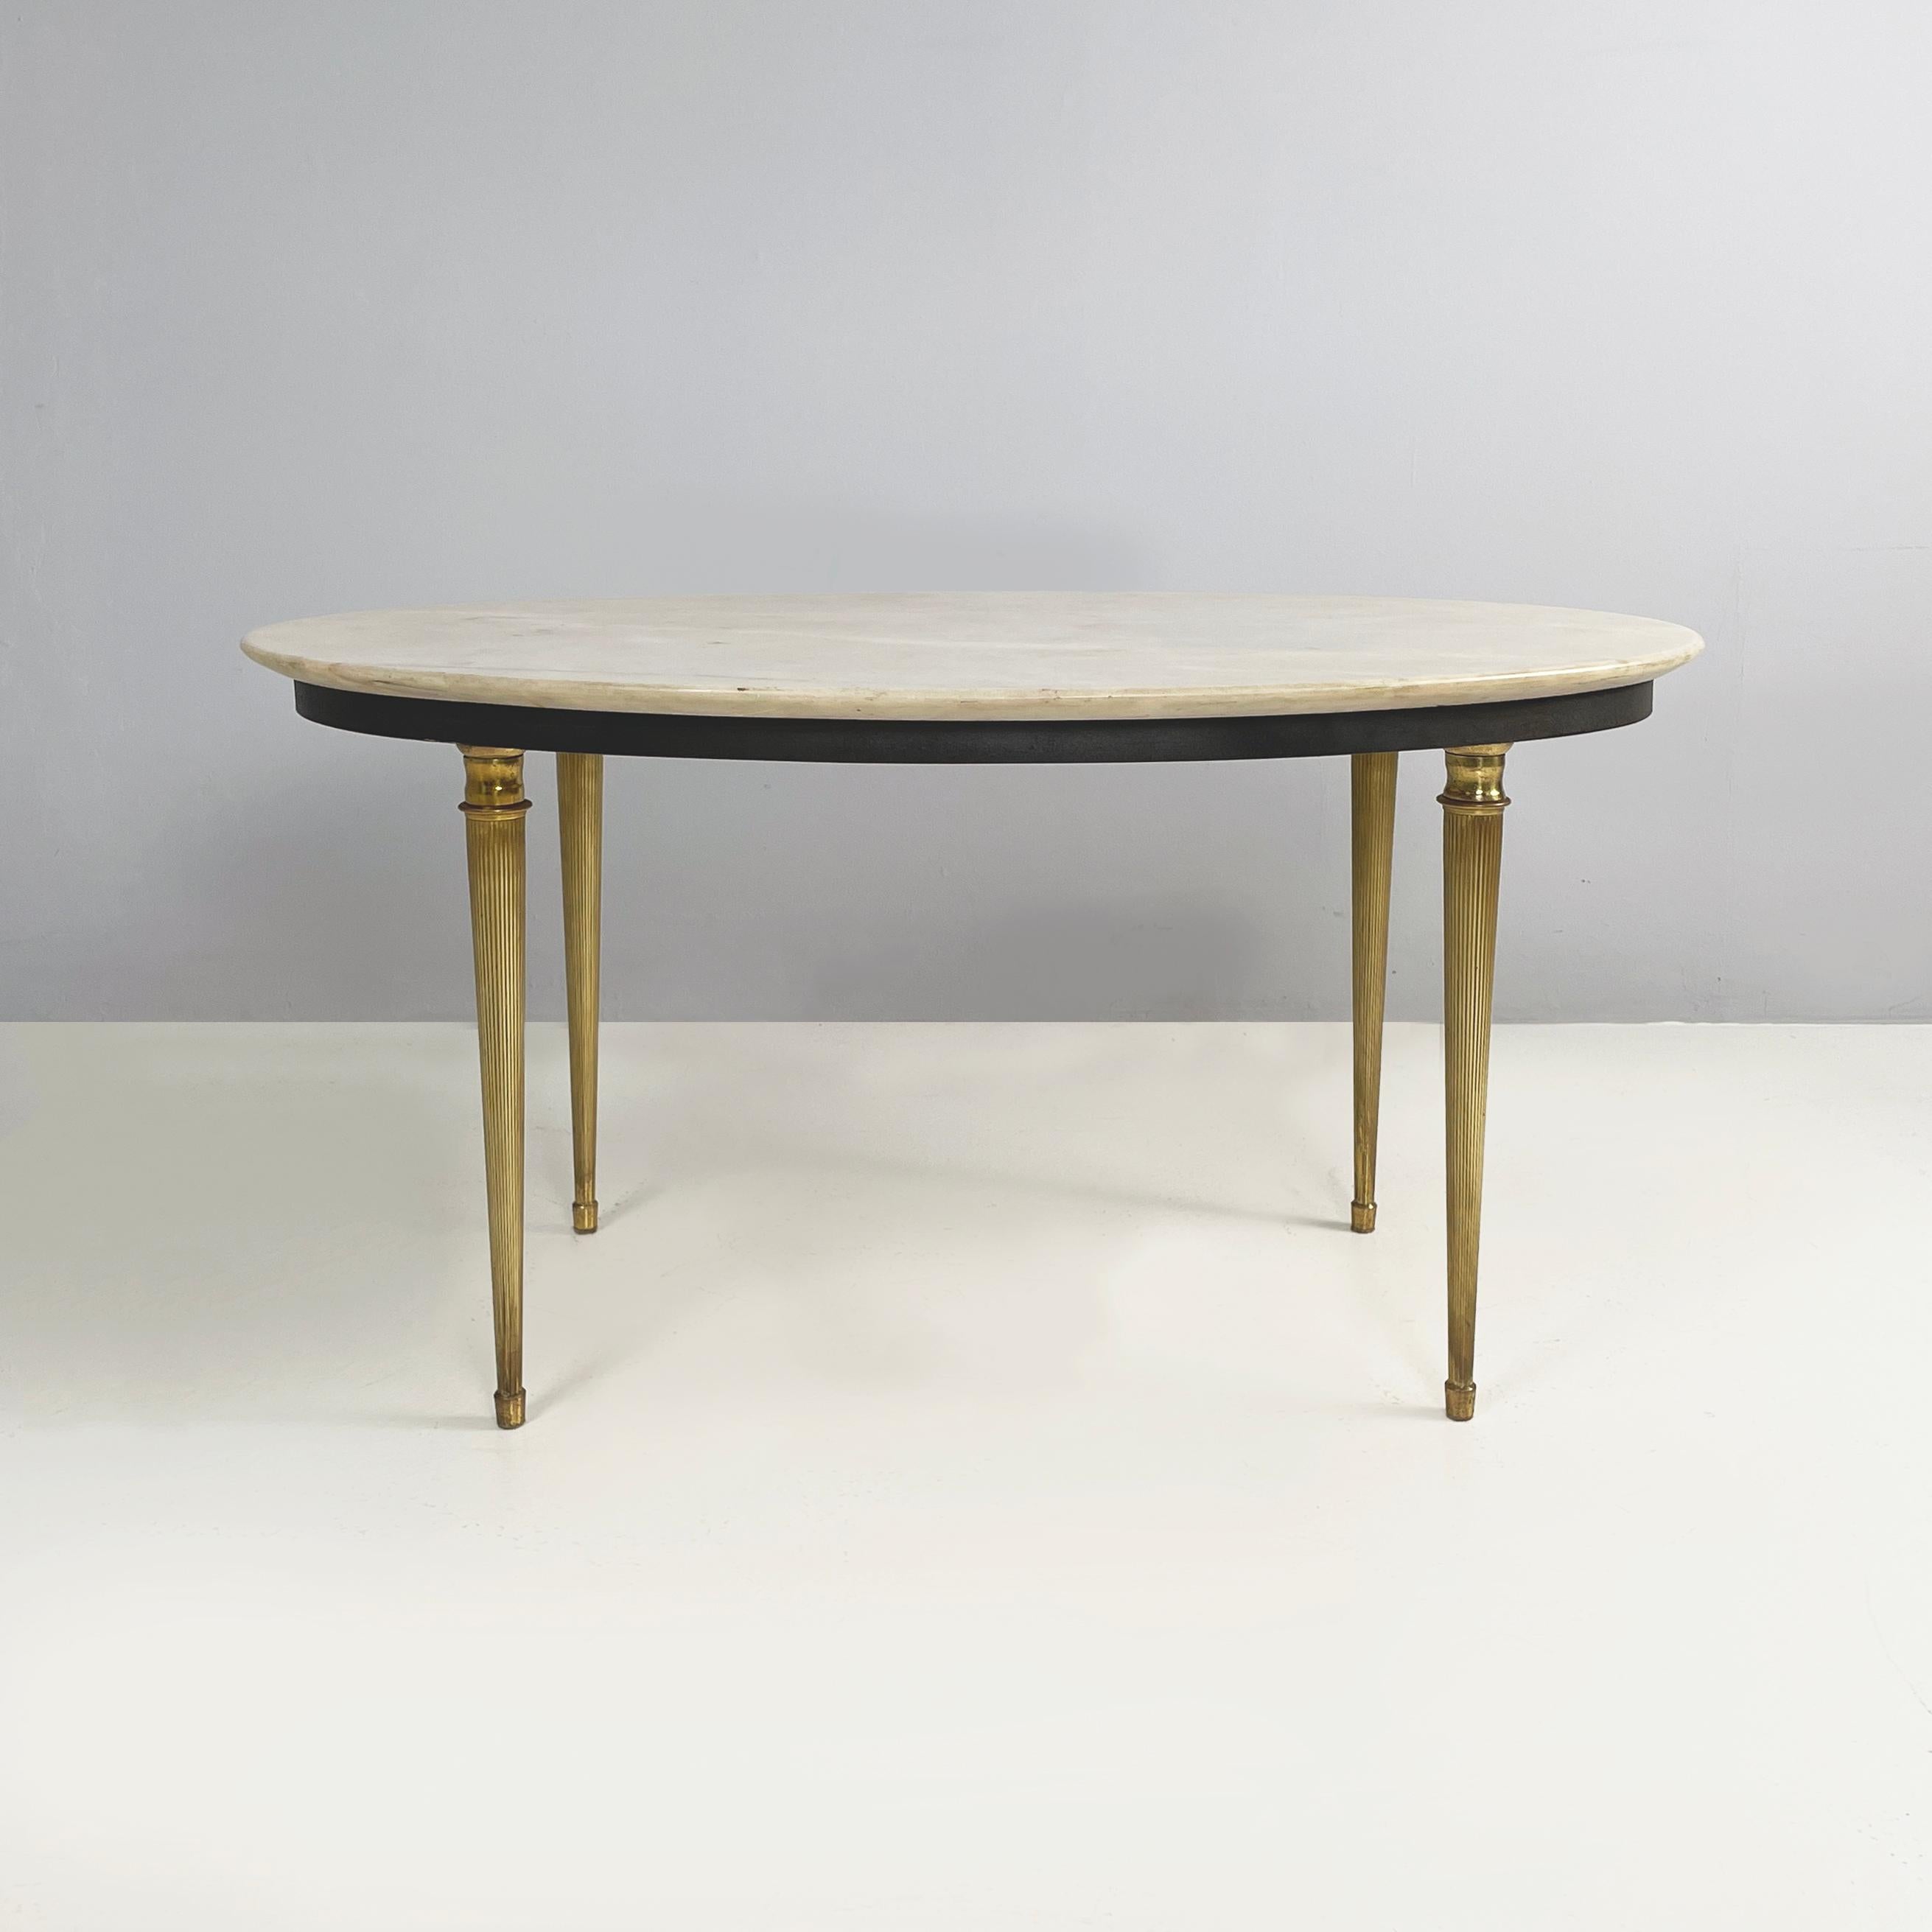 Italian mid-century modern Oval coffee table in marble and brass, 1950s
Coffee table with oval top in light marble. The structure on which it rests is in black painted metal. The round section brass legs are finely crafted: the shape resembles a